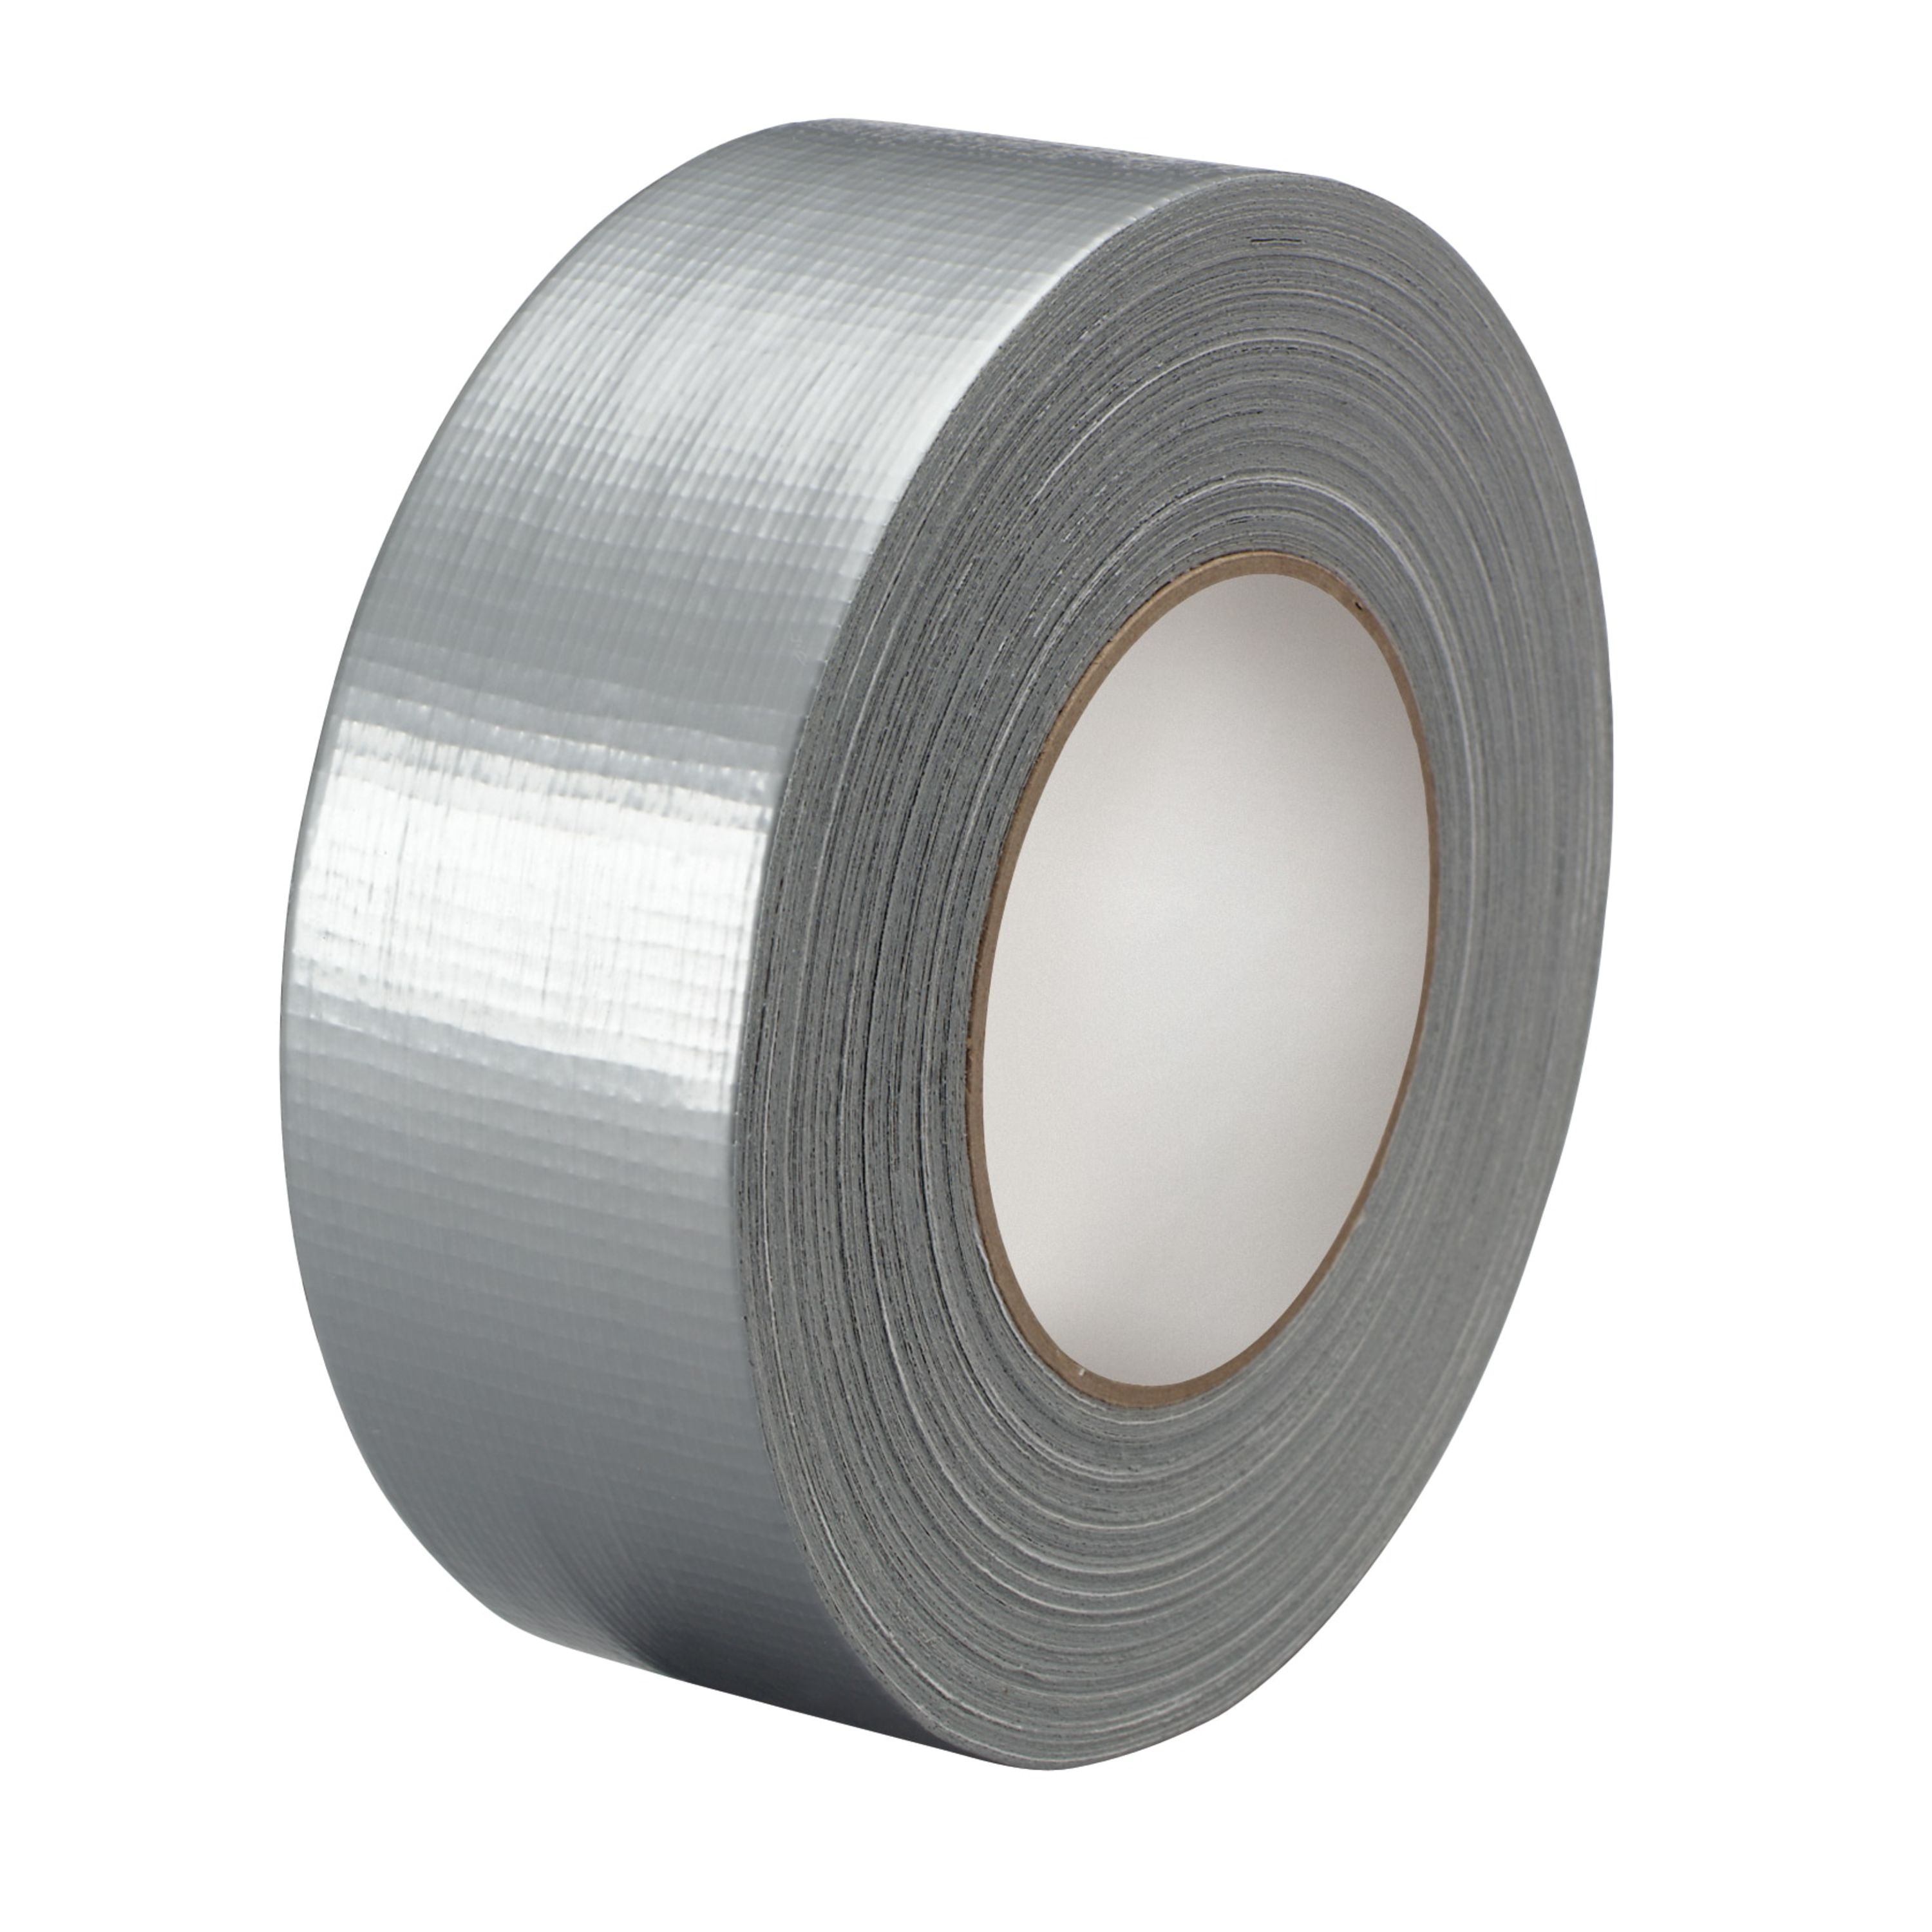 3M™ Multi-Purpose Duct Tape 3900 Silver, 48 mm x 54.8 m, 8.1 mil, 24 per
case, Conveniently Packaged